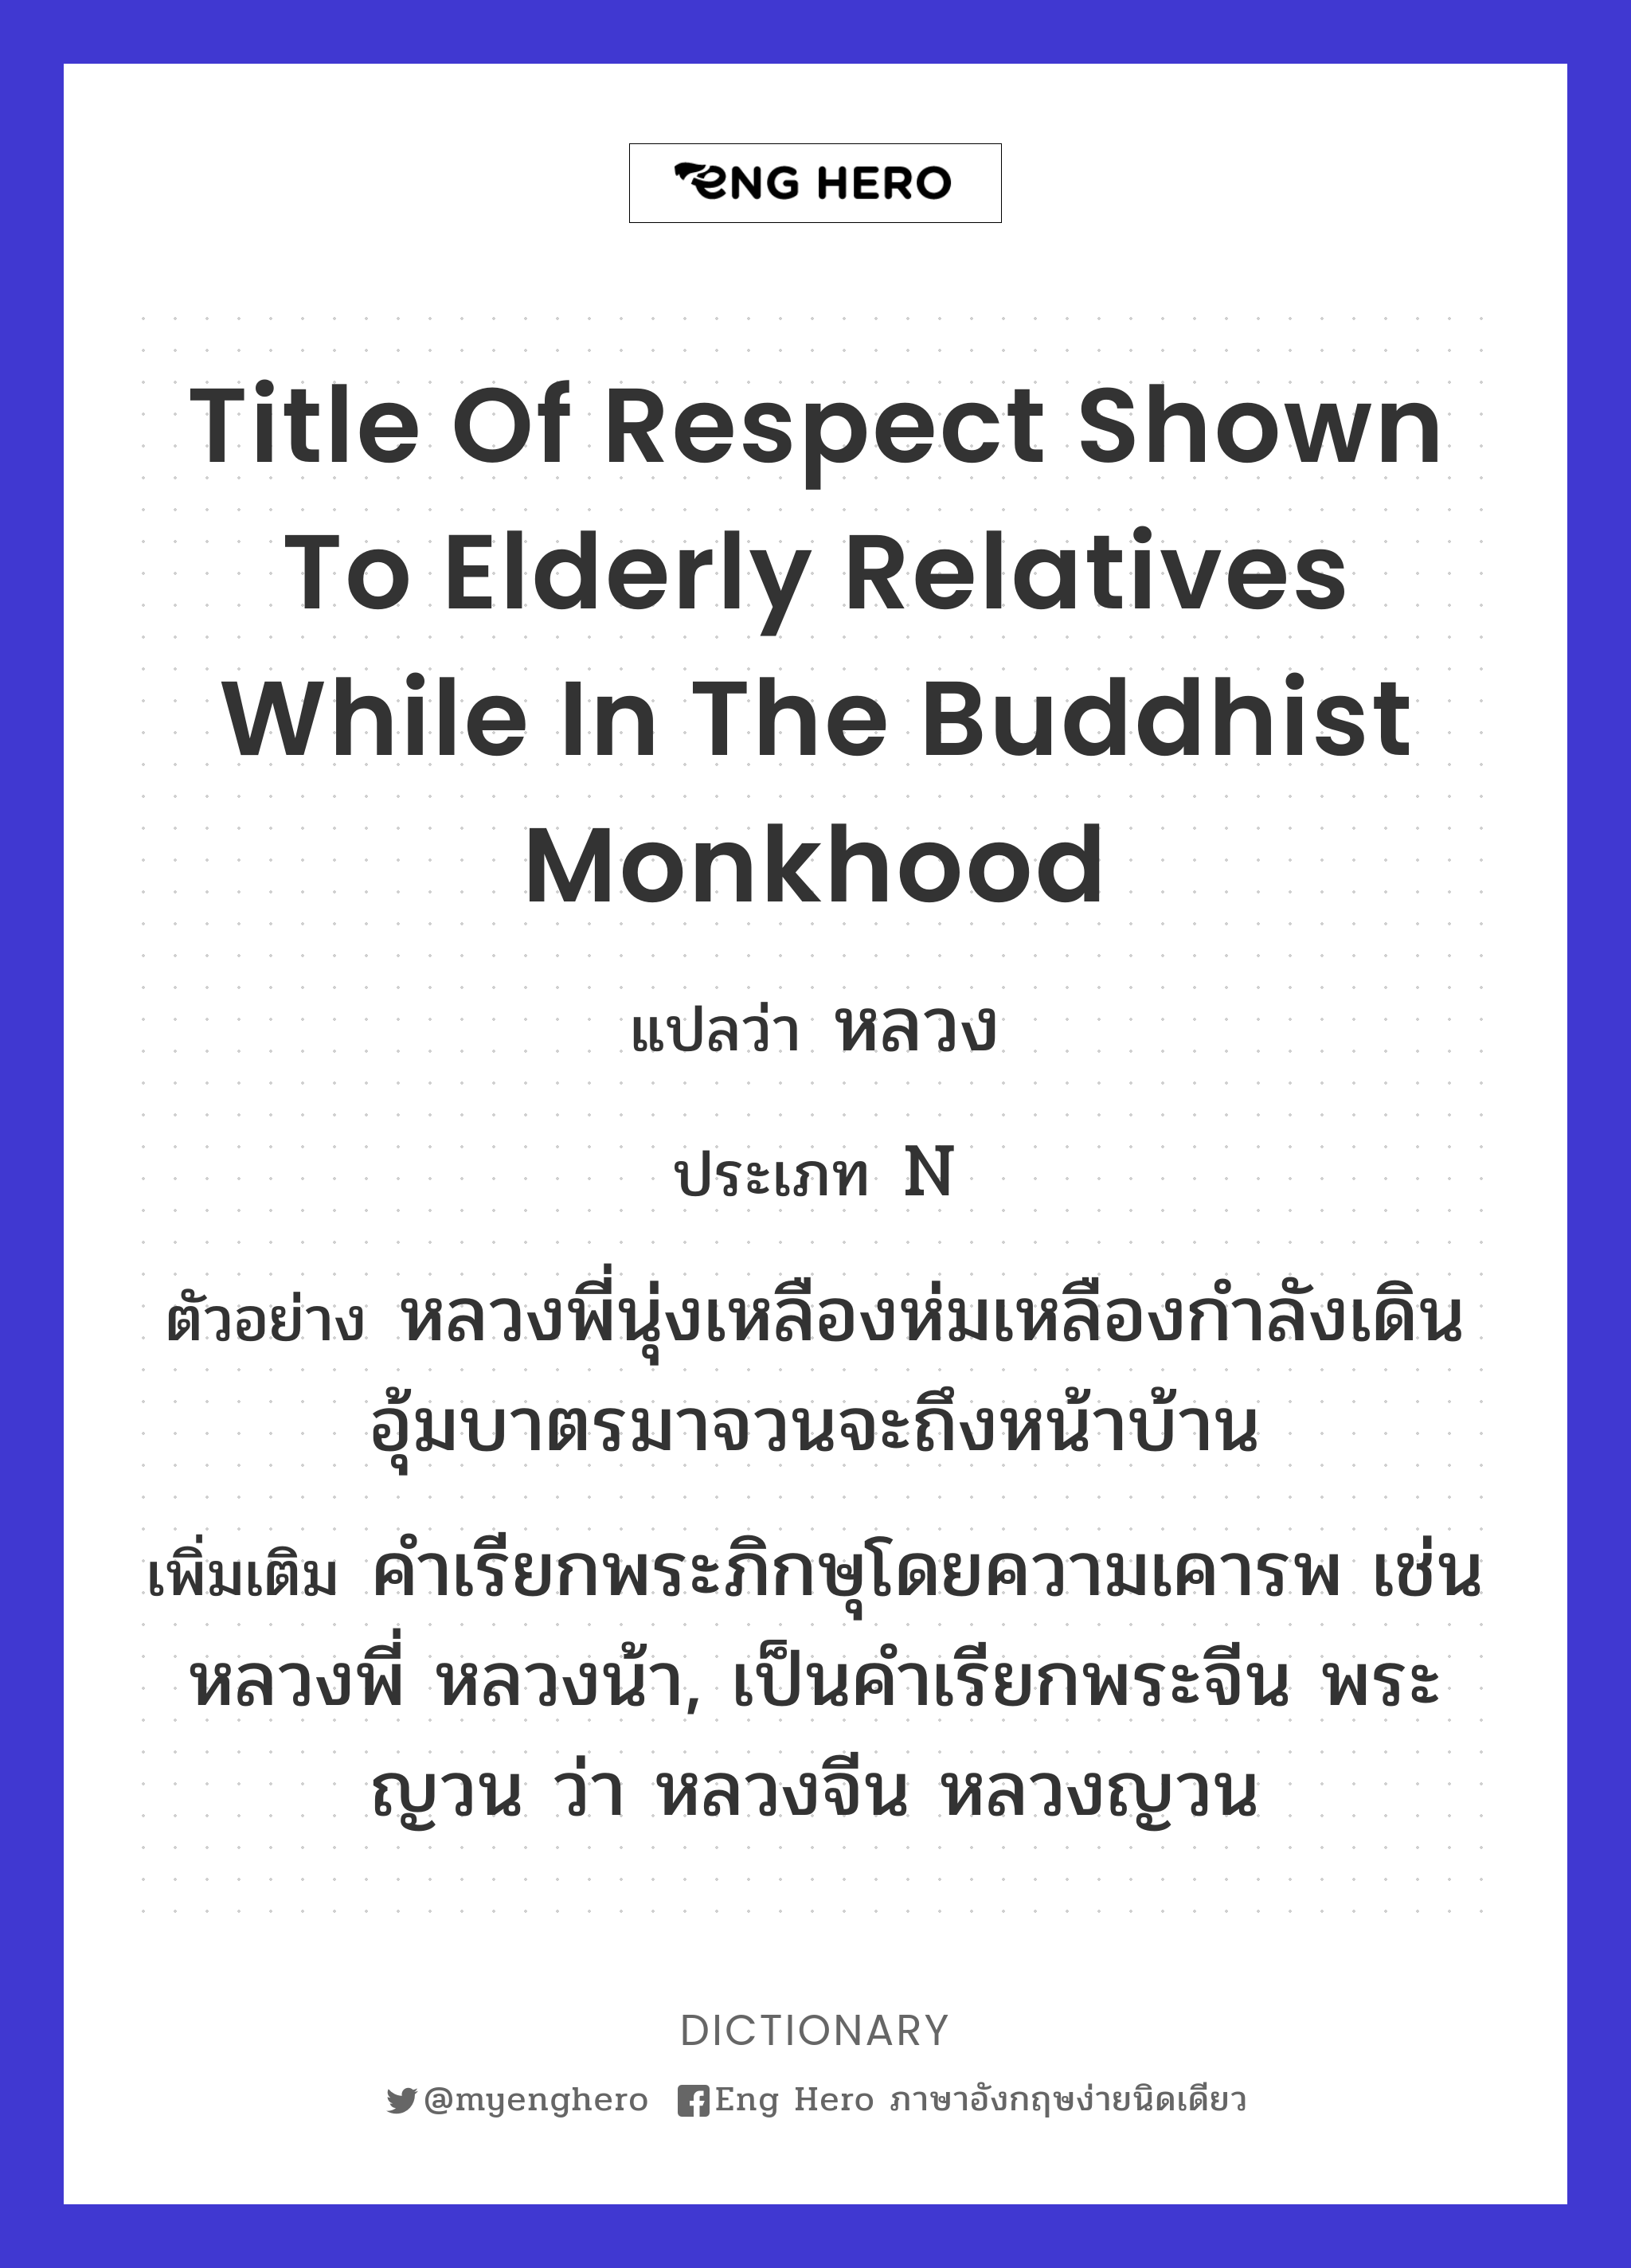 title of respect shown to elderly relatives while in the Buddhist monkhood